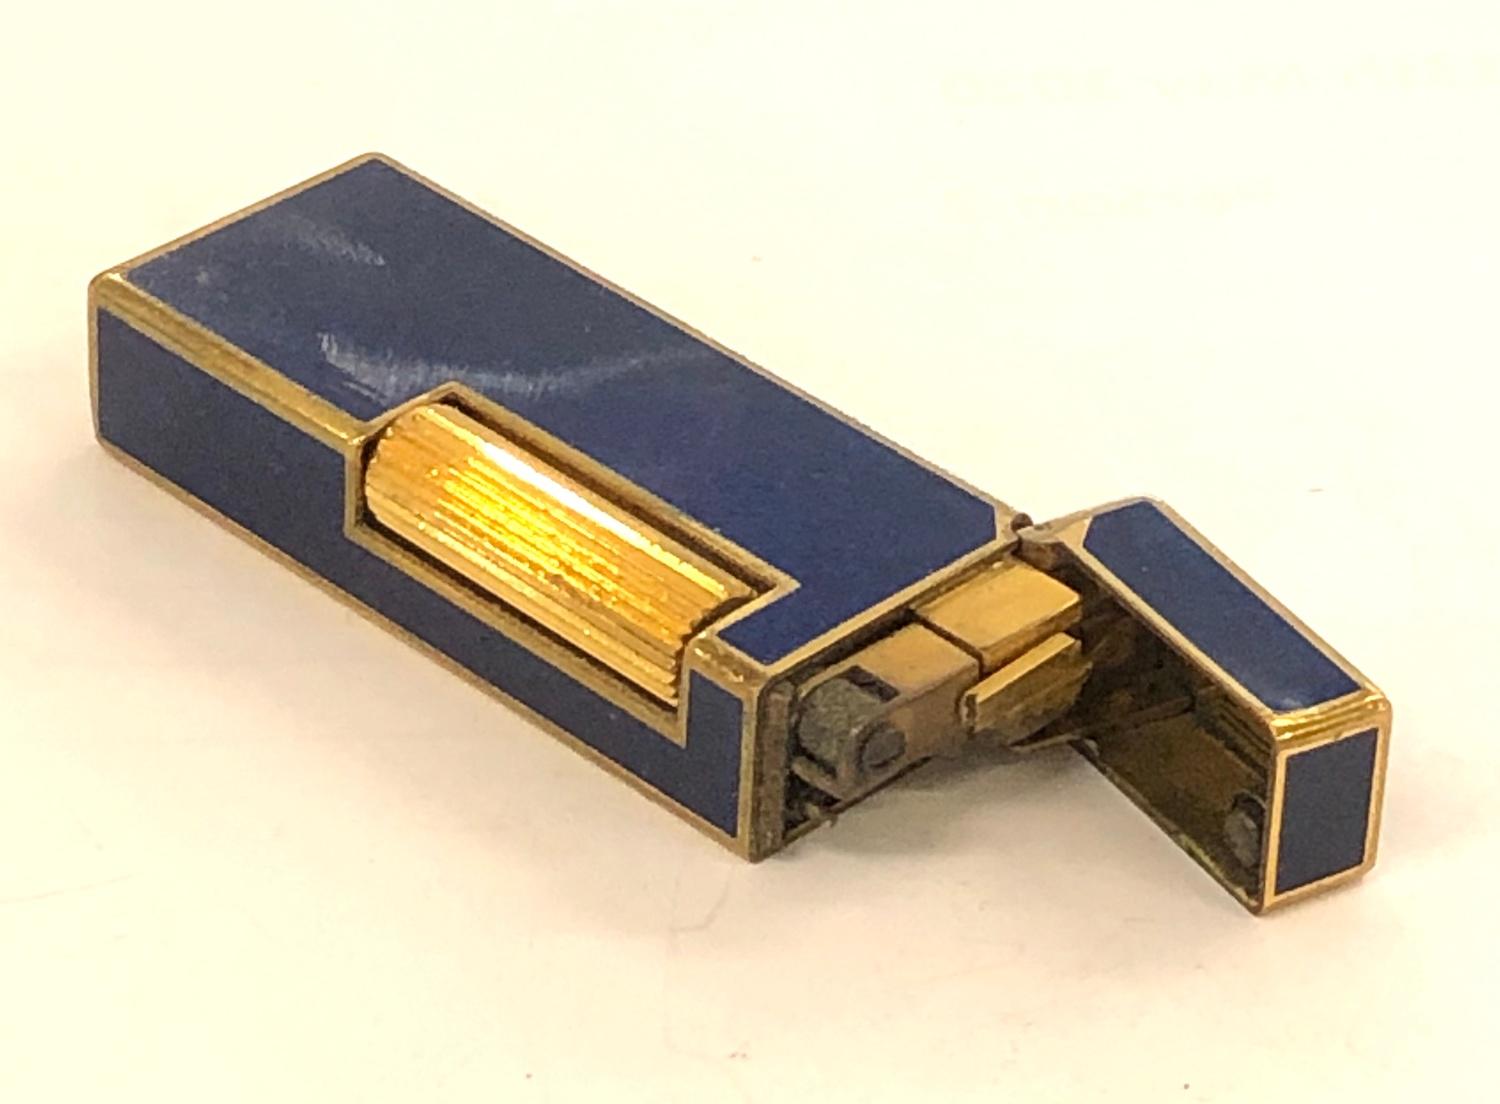 Vintage Dunhill cigarette lighter, in good untested condition as shown in images. - Image 4 of 4